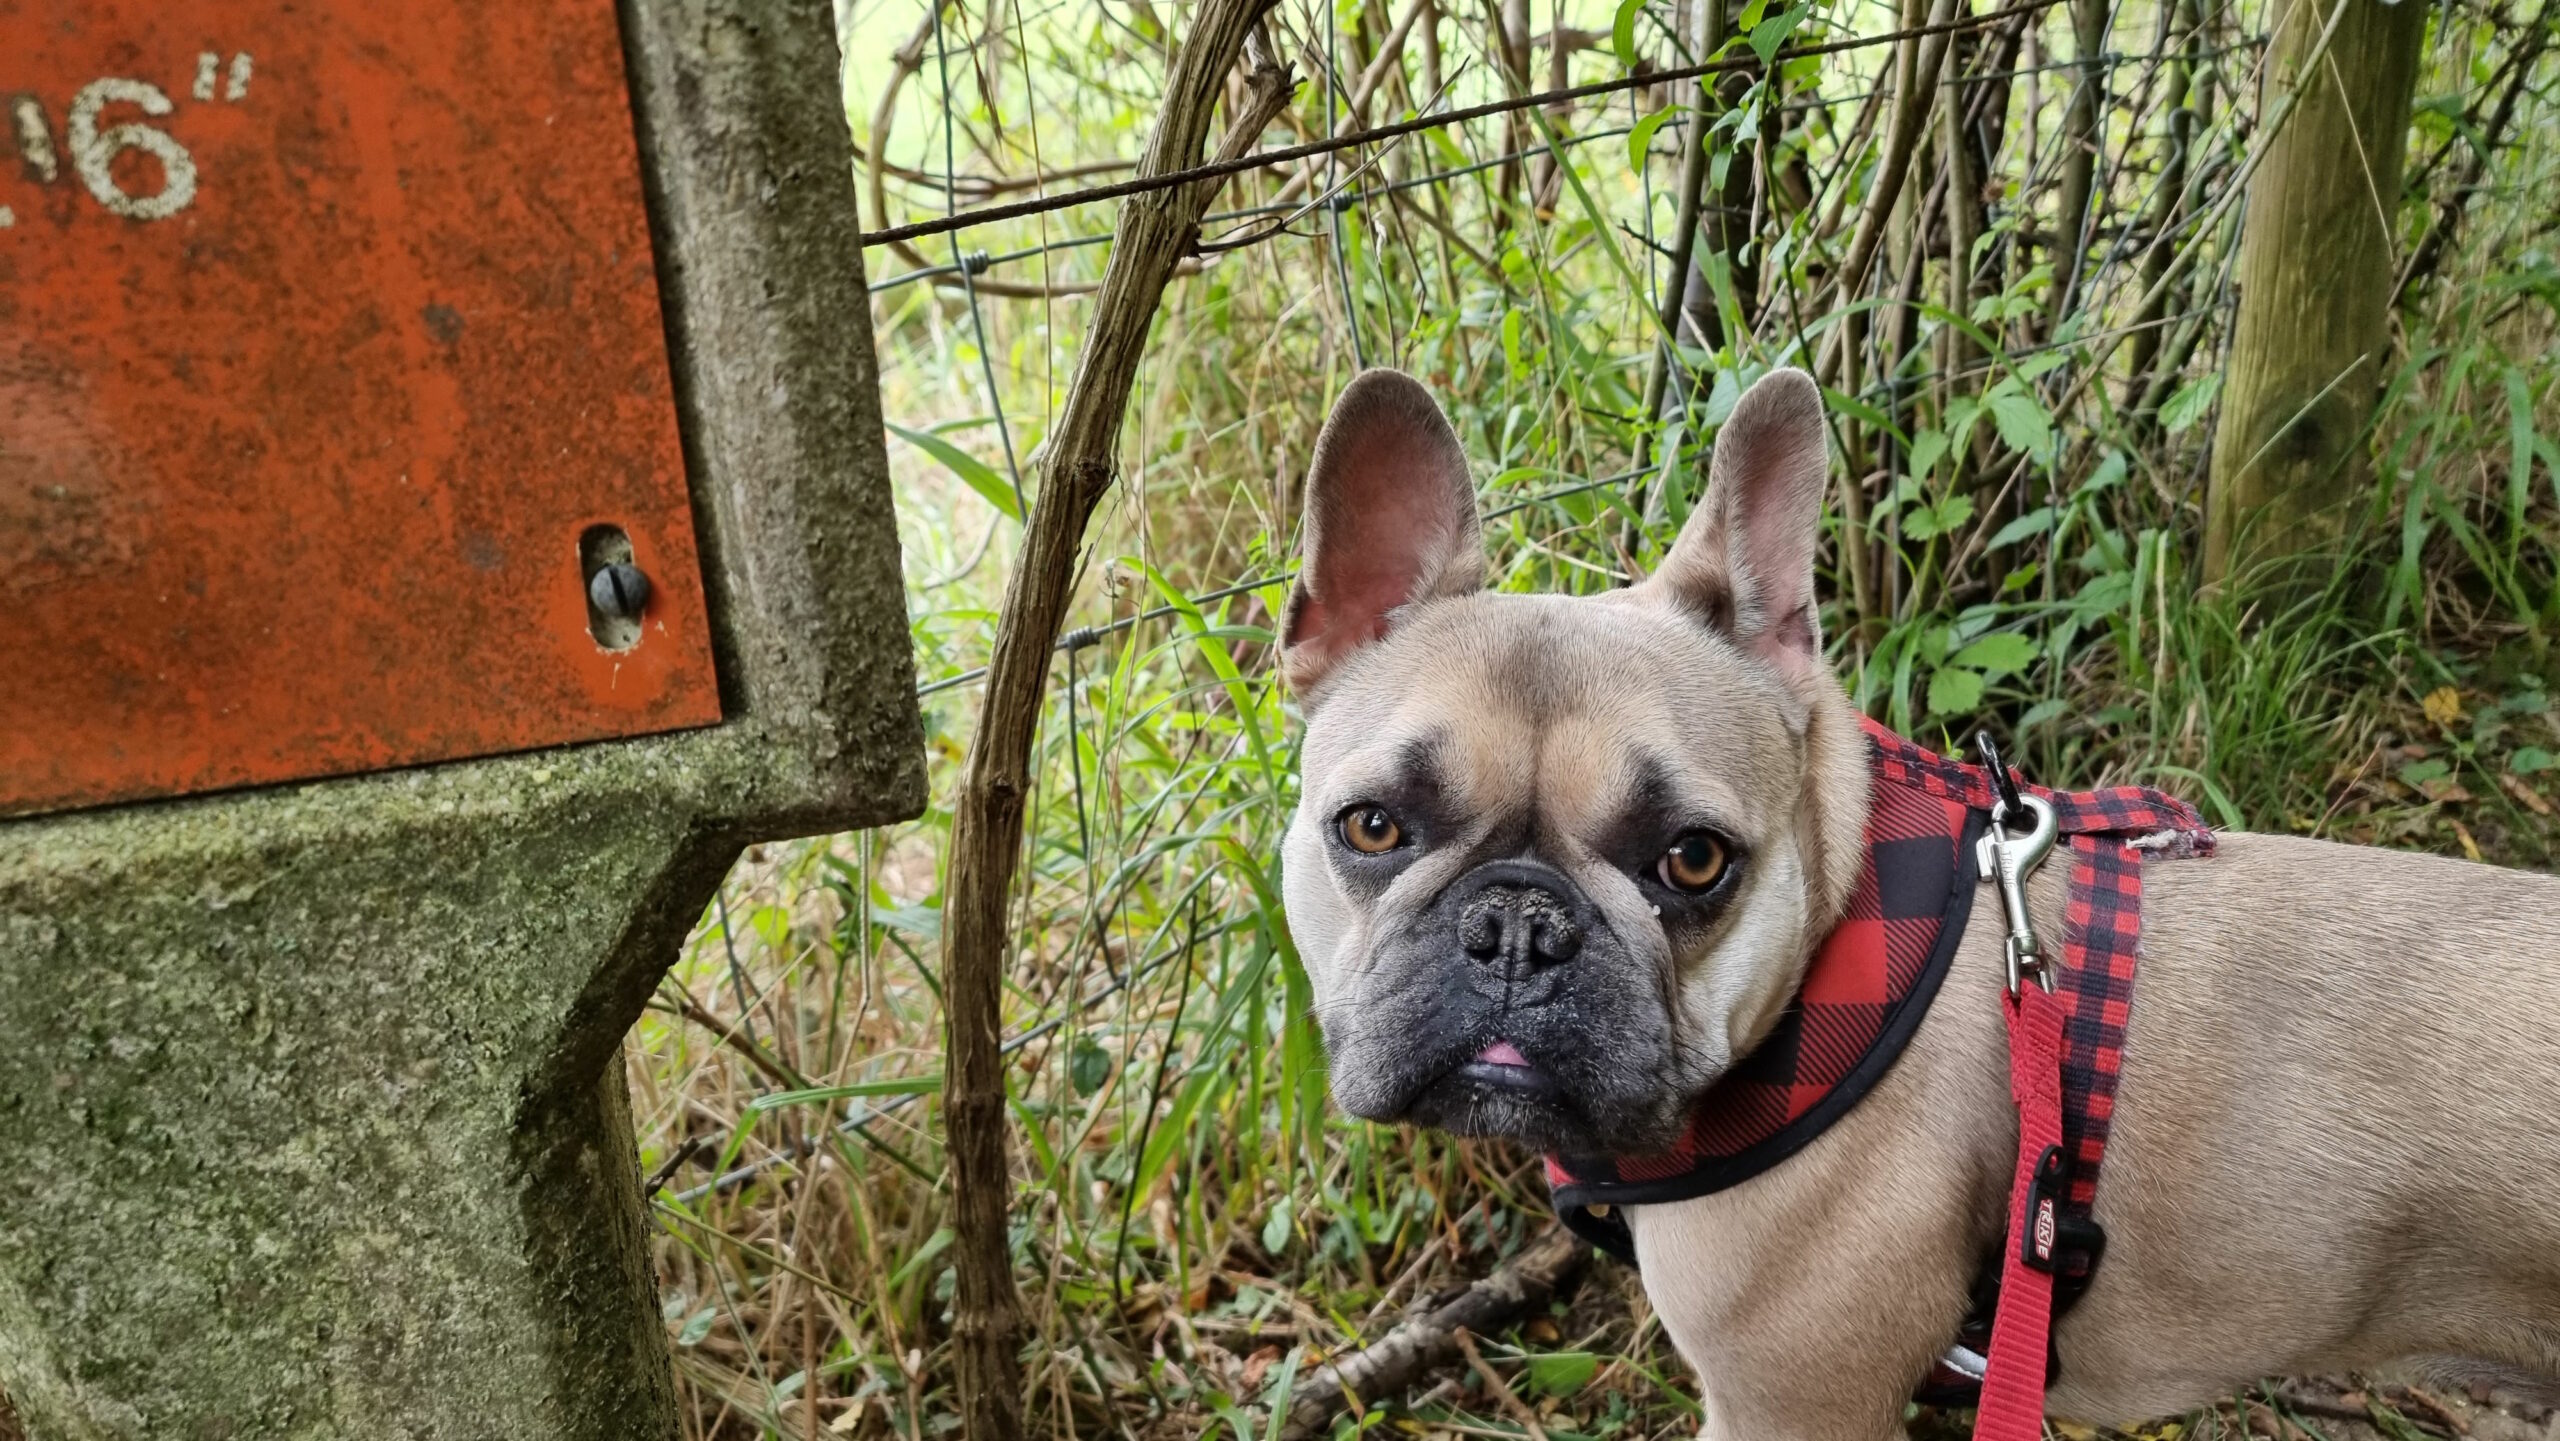 A French Bulldog standing by a rural "gas pipeline" warning sign.